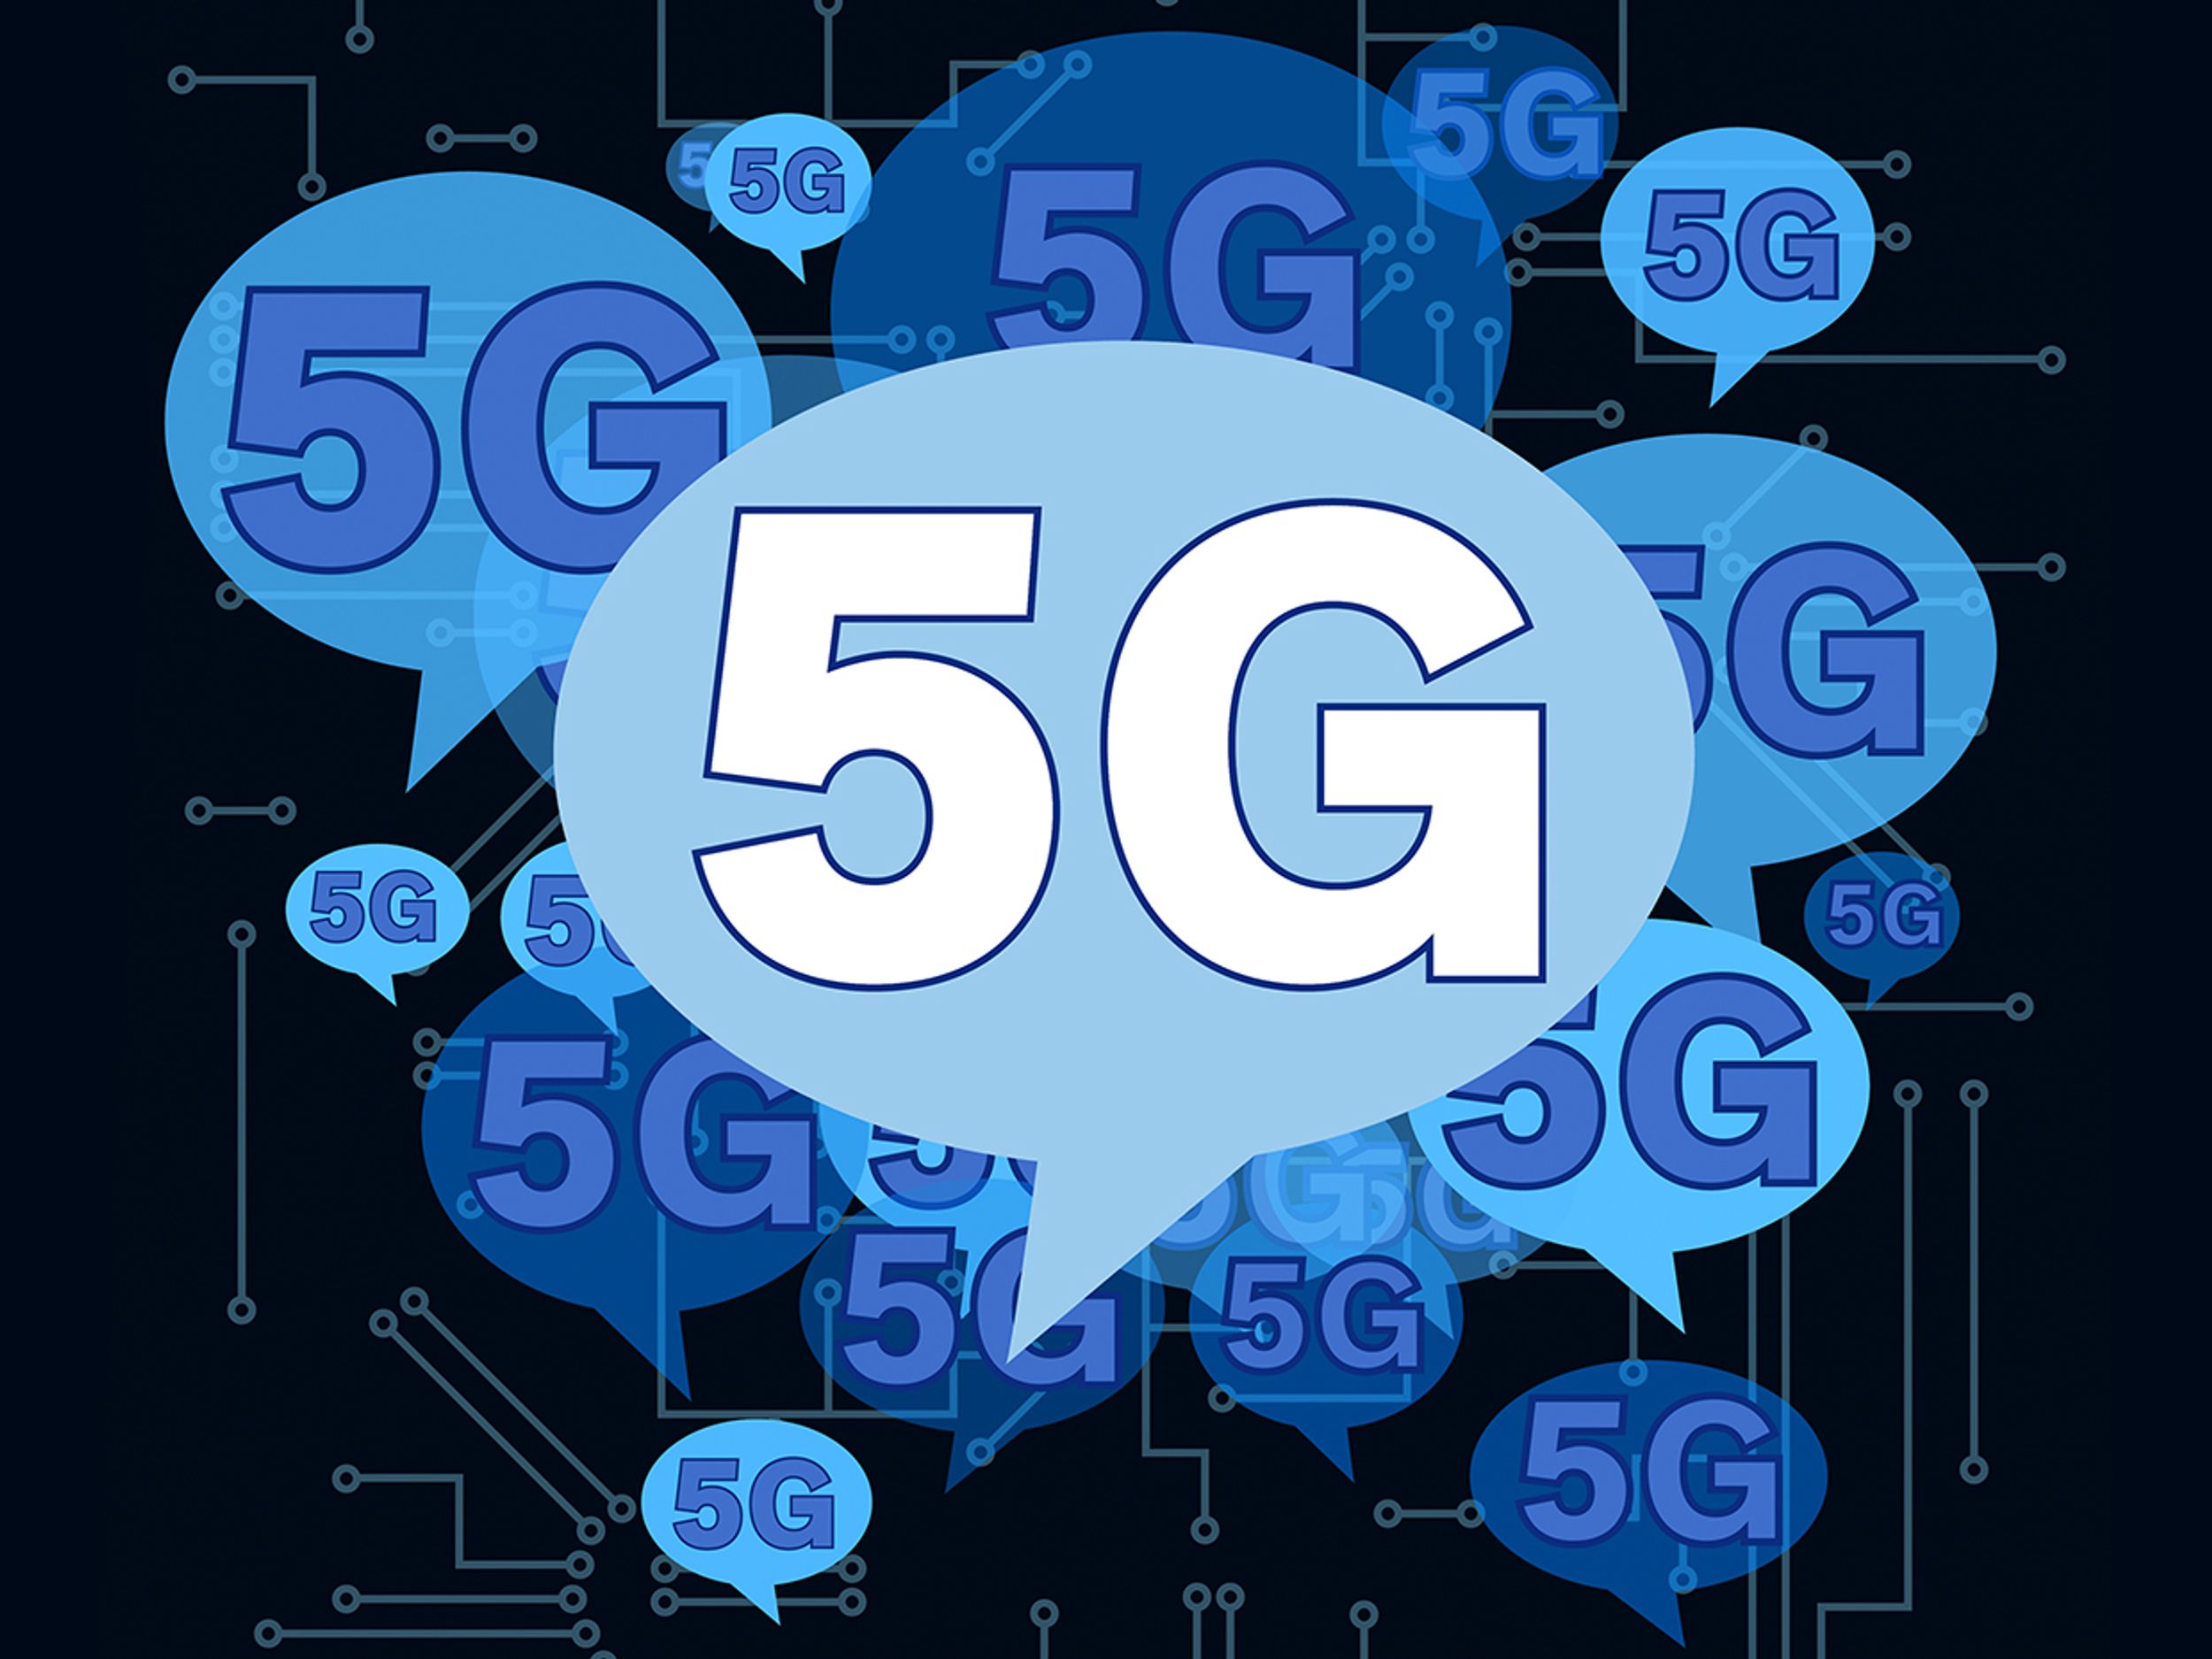 Illustration of speech bubbles, all talking about 5G